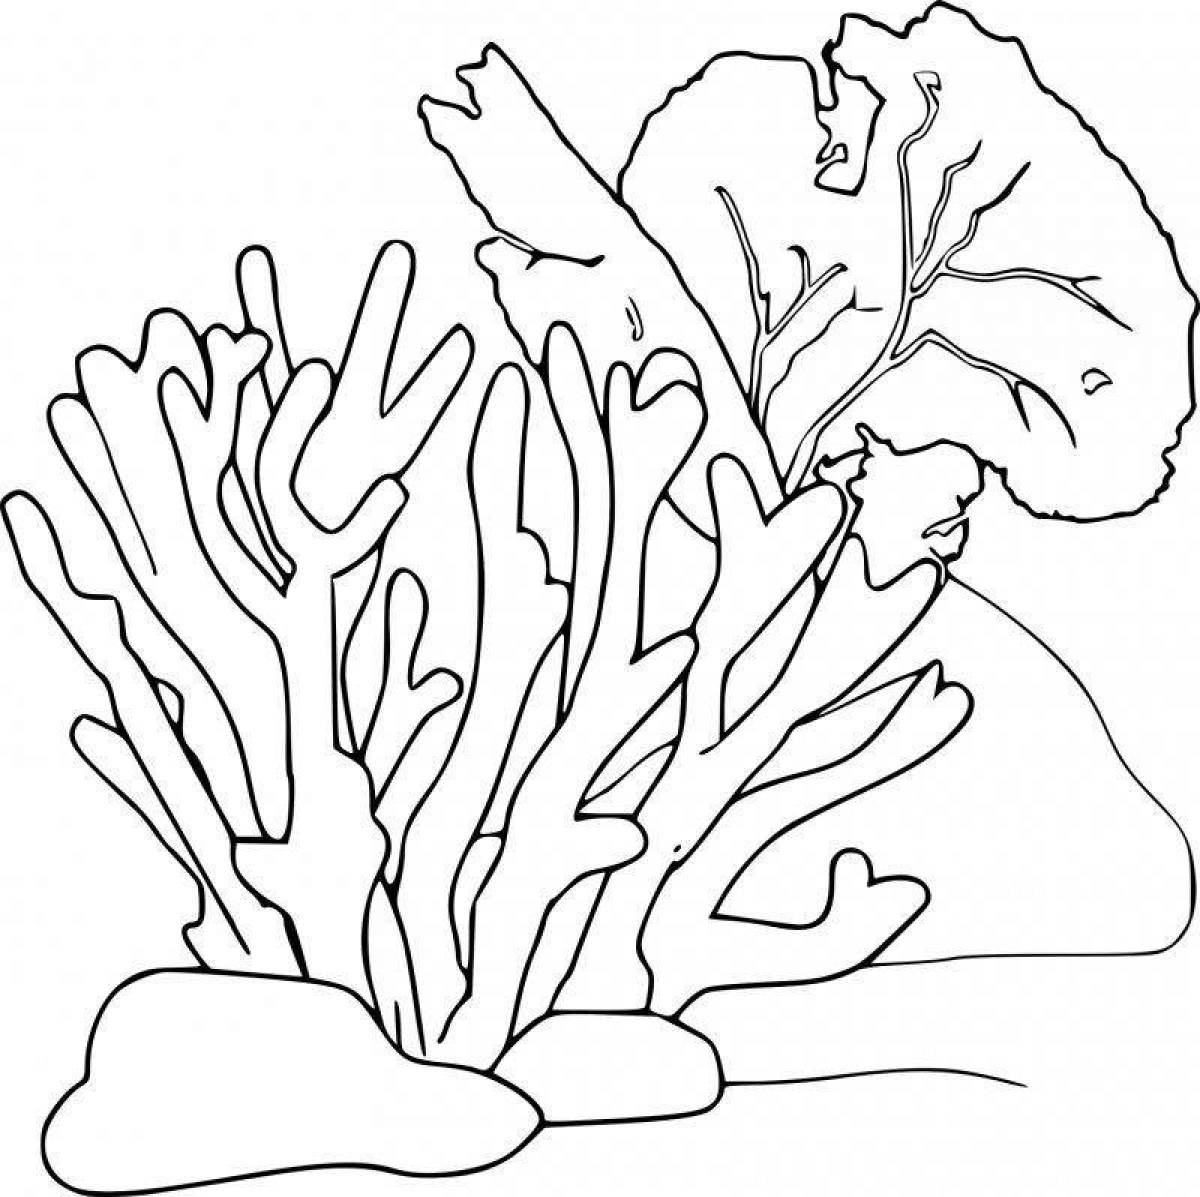 Showy coral coloring book for kids